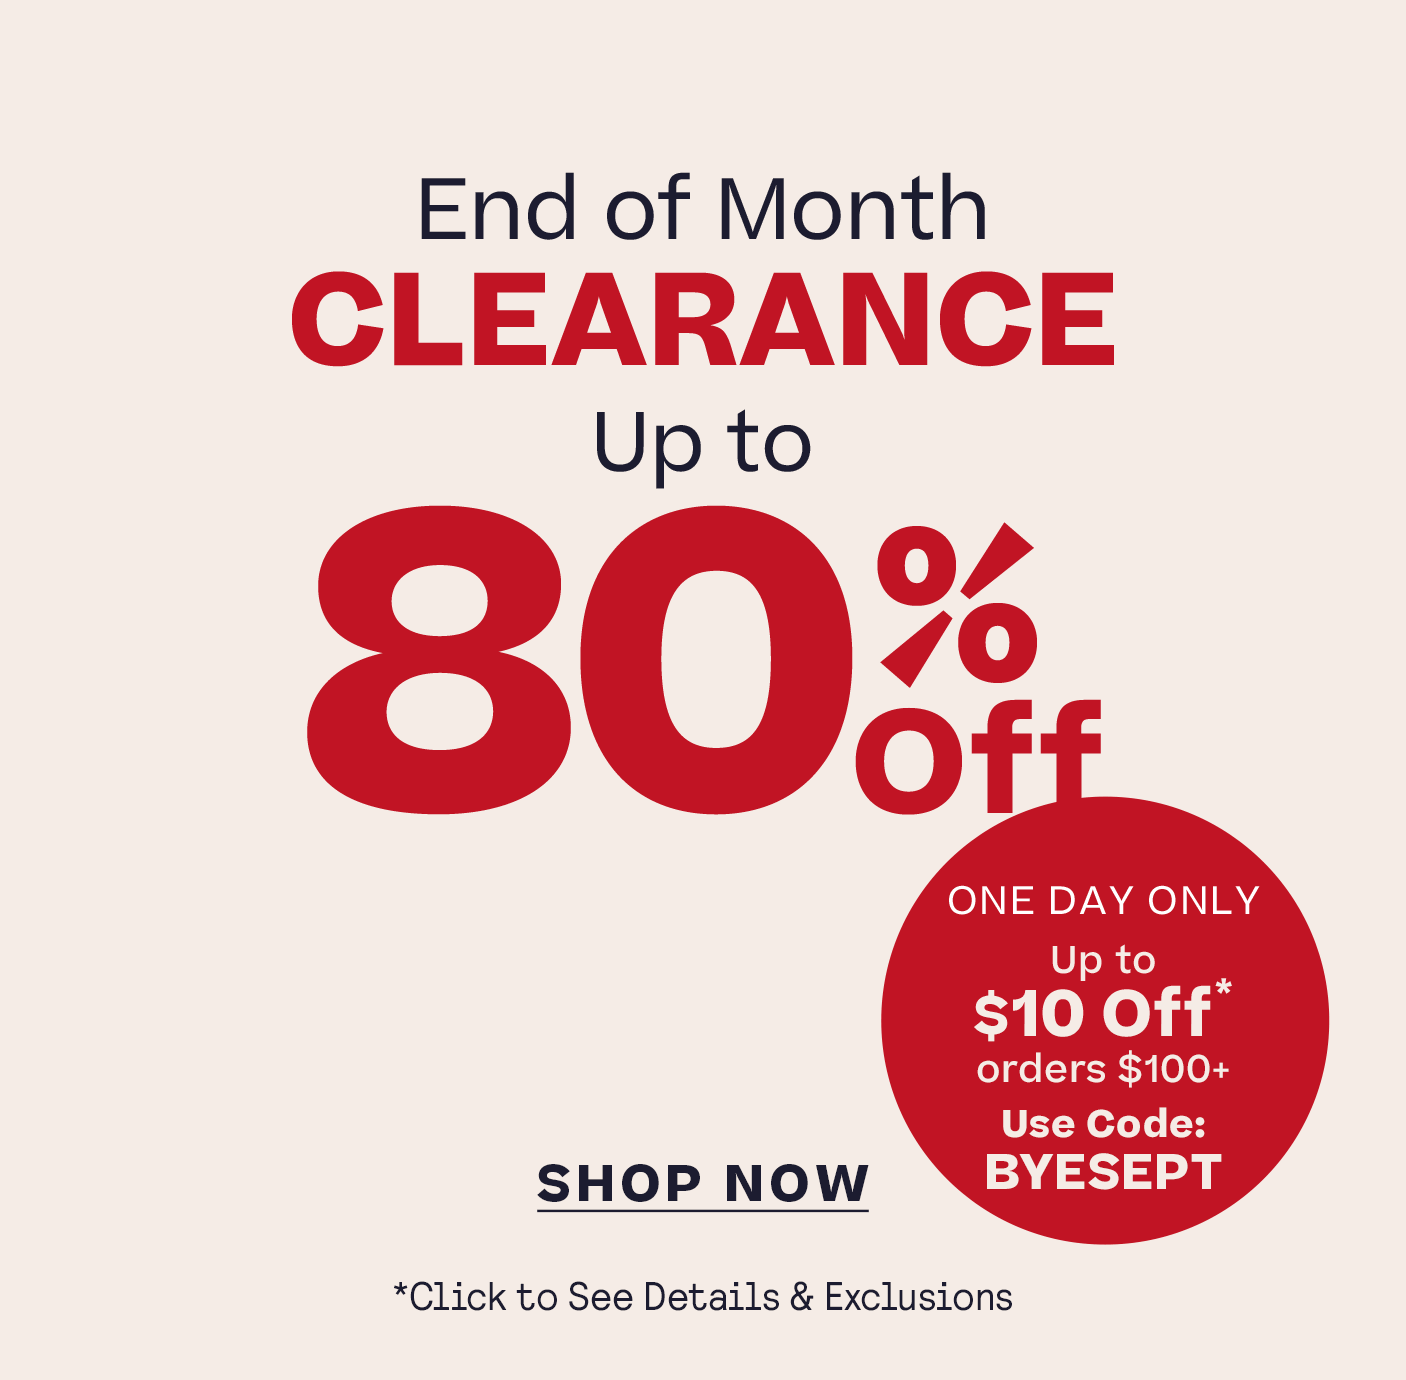 Shop End of Month Clearance Up to 80% Off One Day Only
$5 Off $60+  $10 Off $100+ Code BYESEPT click for details